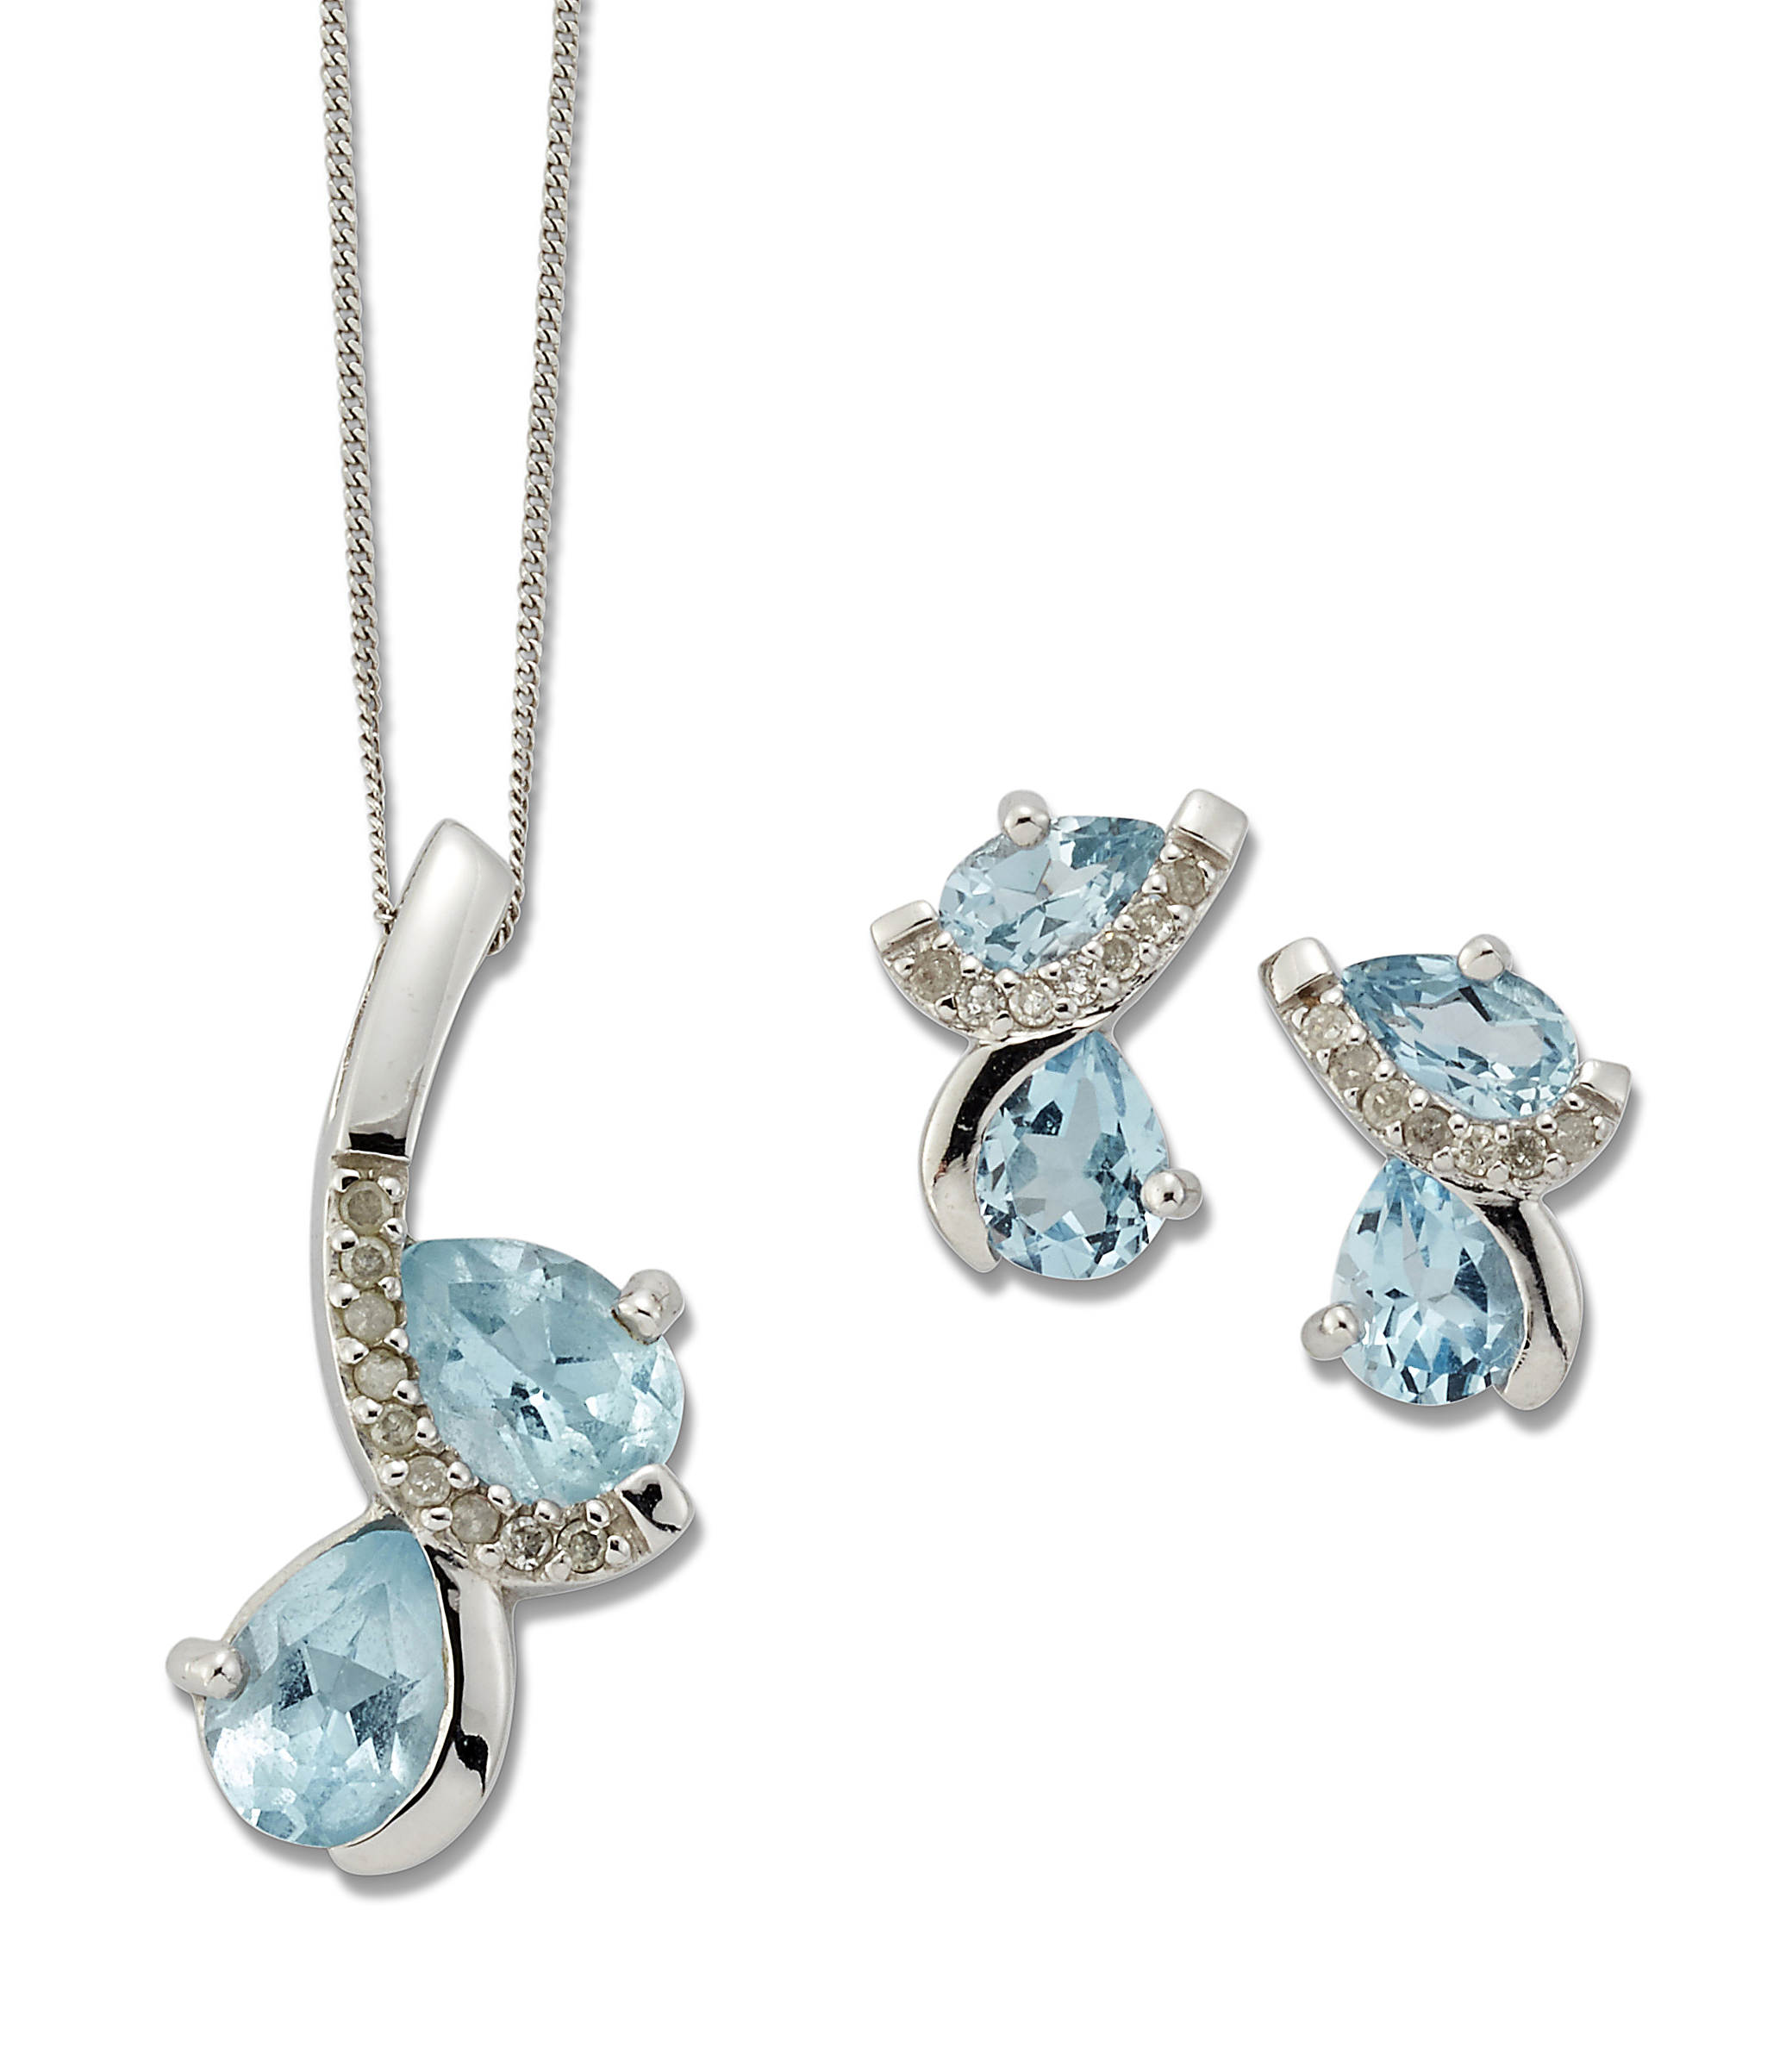 A 9 CARAT WHITE GOLD BLUE TOPAZ AND DIAMOND PENDANT ON CHAIN AND EARRING SET